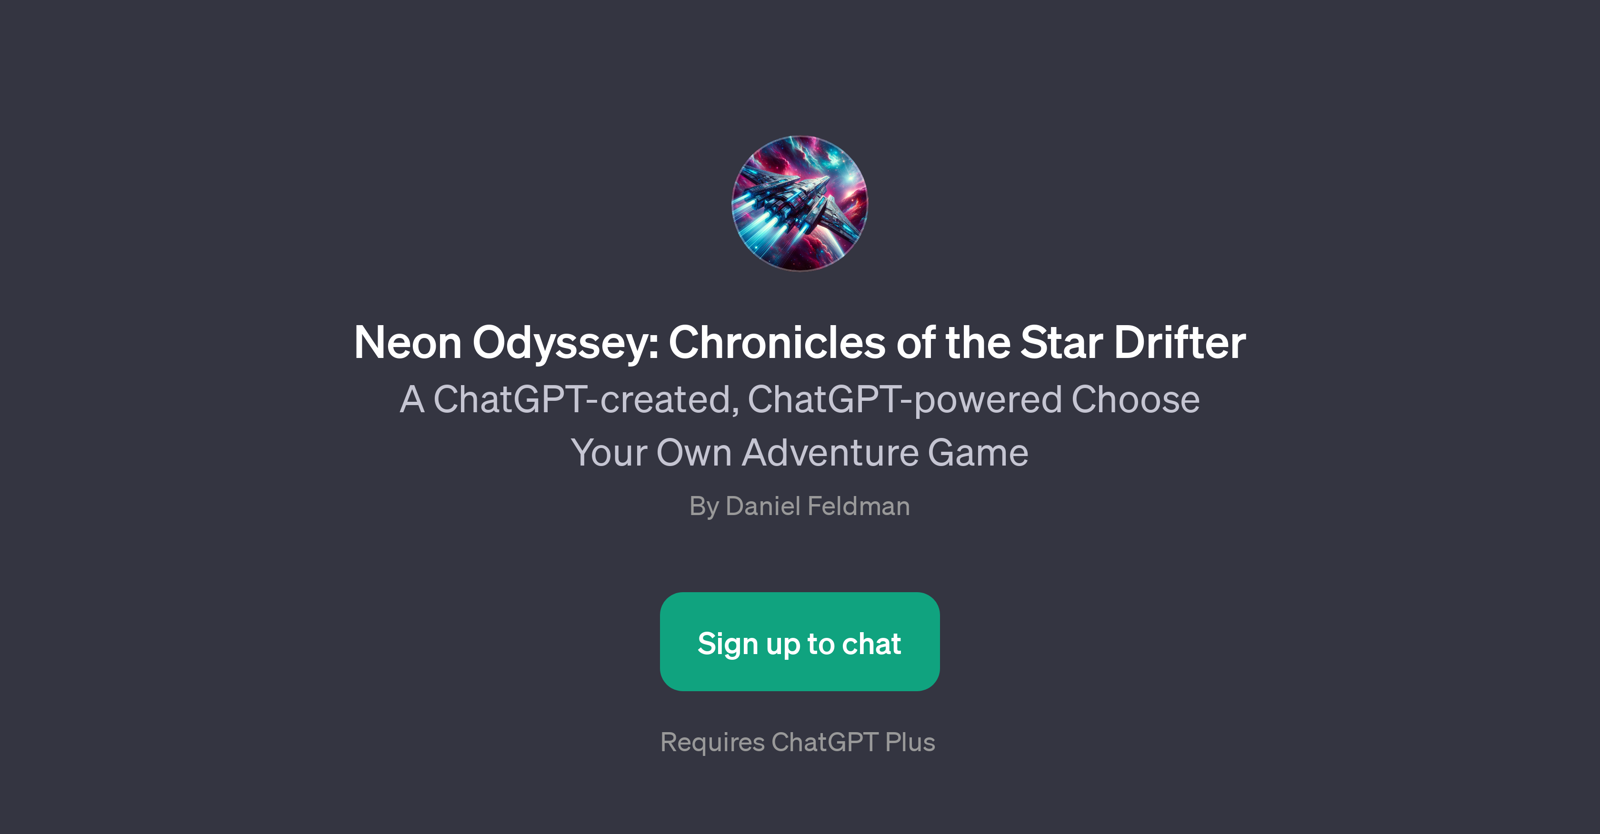 Neon Odyssey: Chronicles of the Star Drifter website